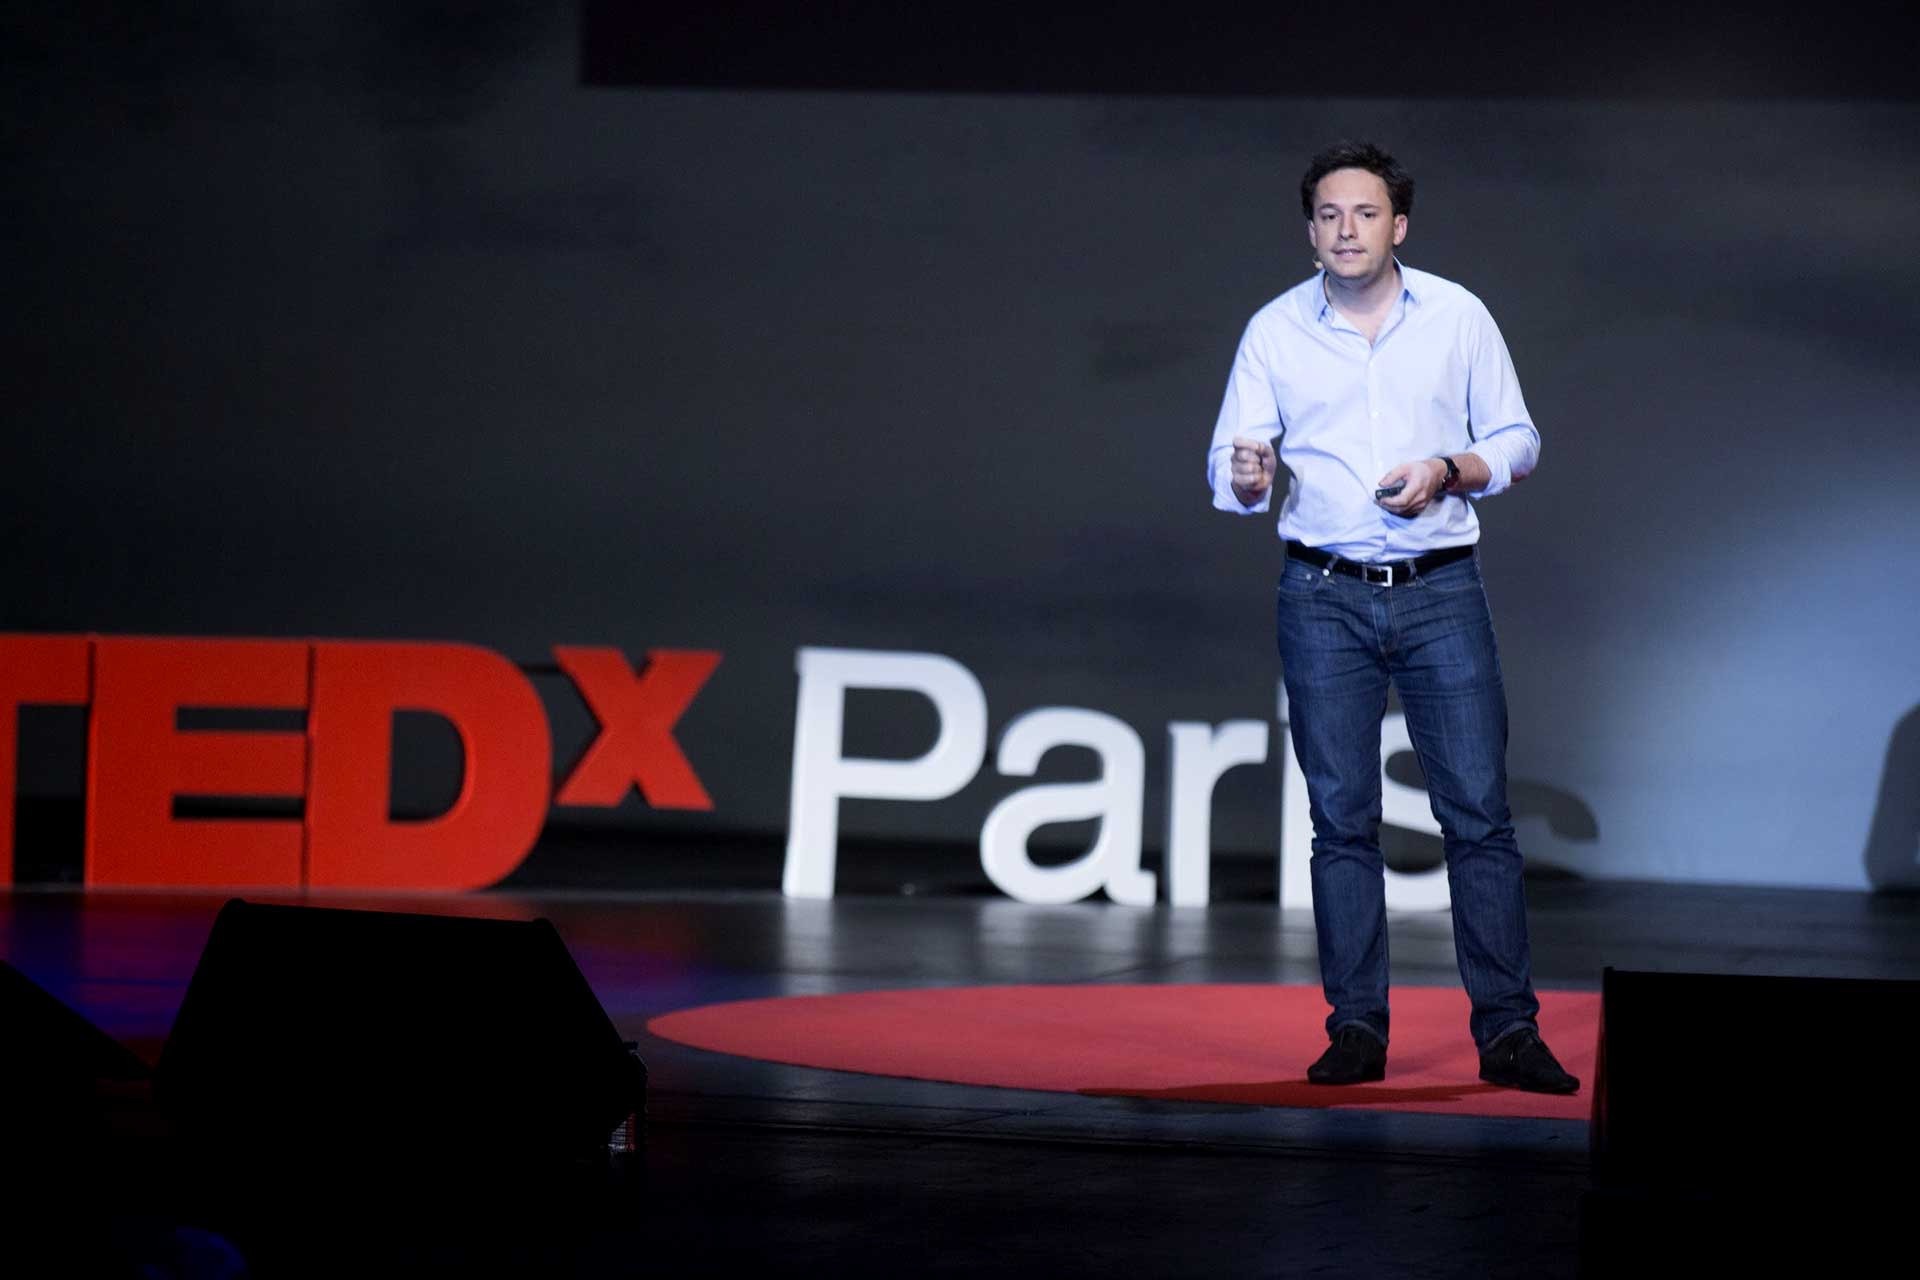 conference-TEDxParis-2014-20.jpg